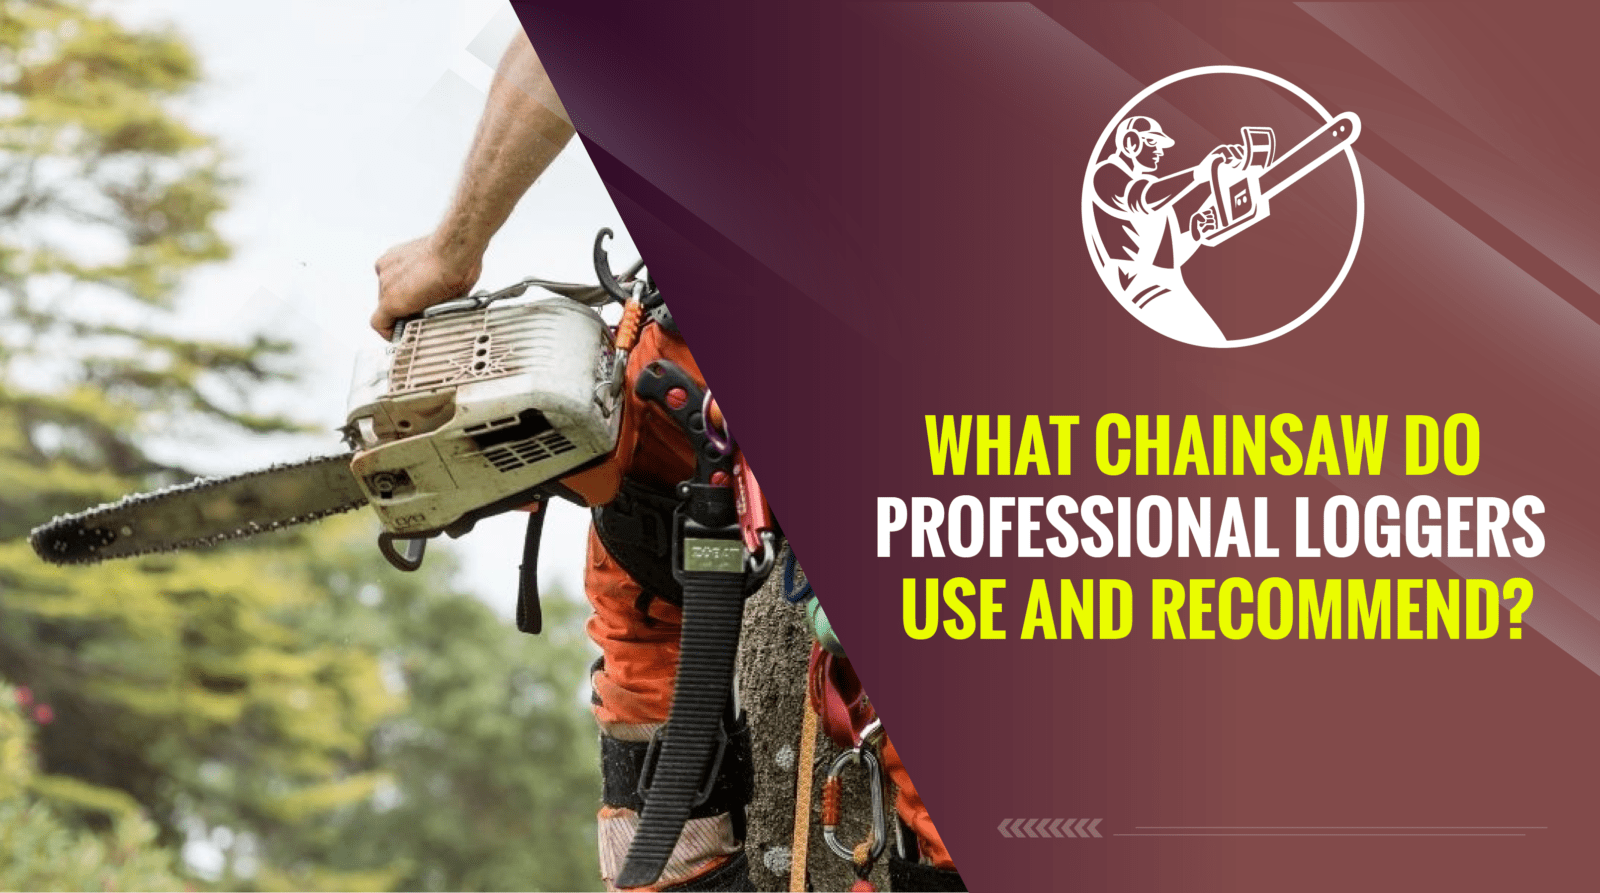 What Chainsaw Do Professional Loggers Use and Recommend?